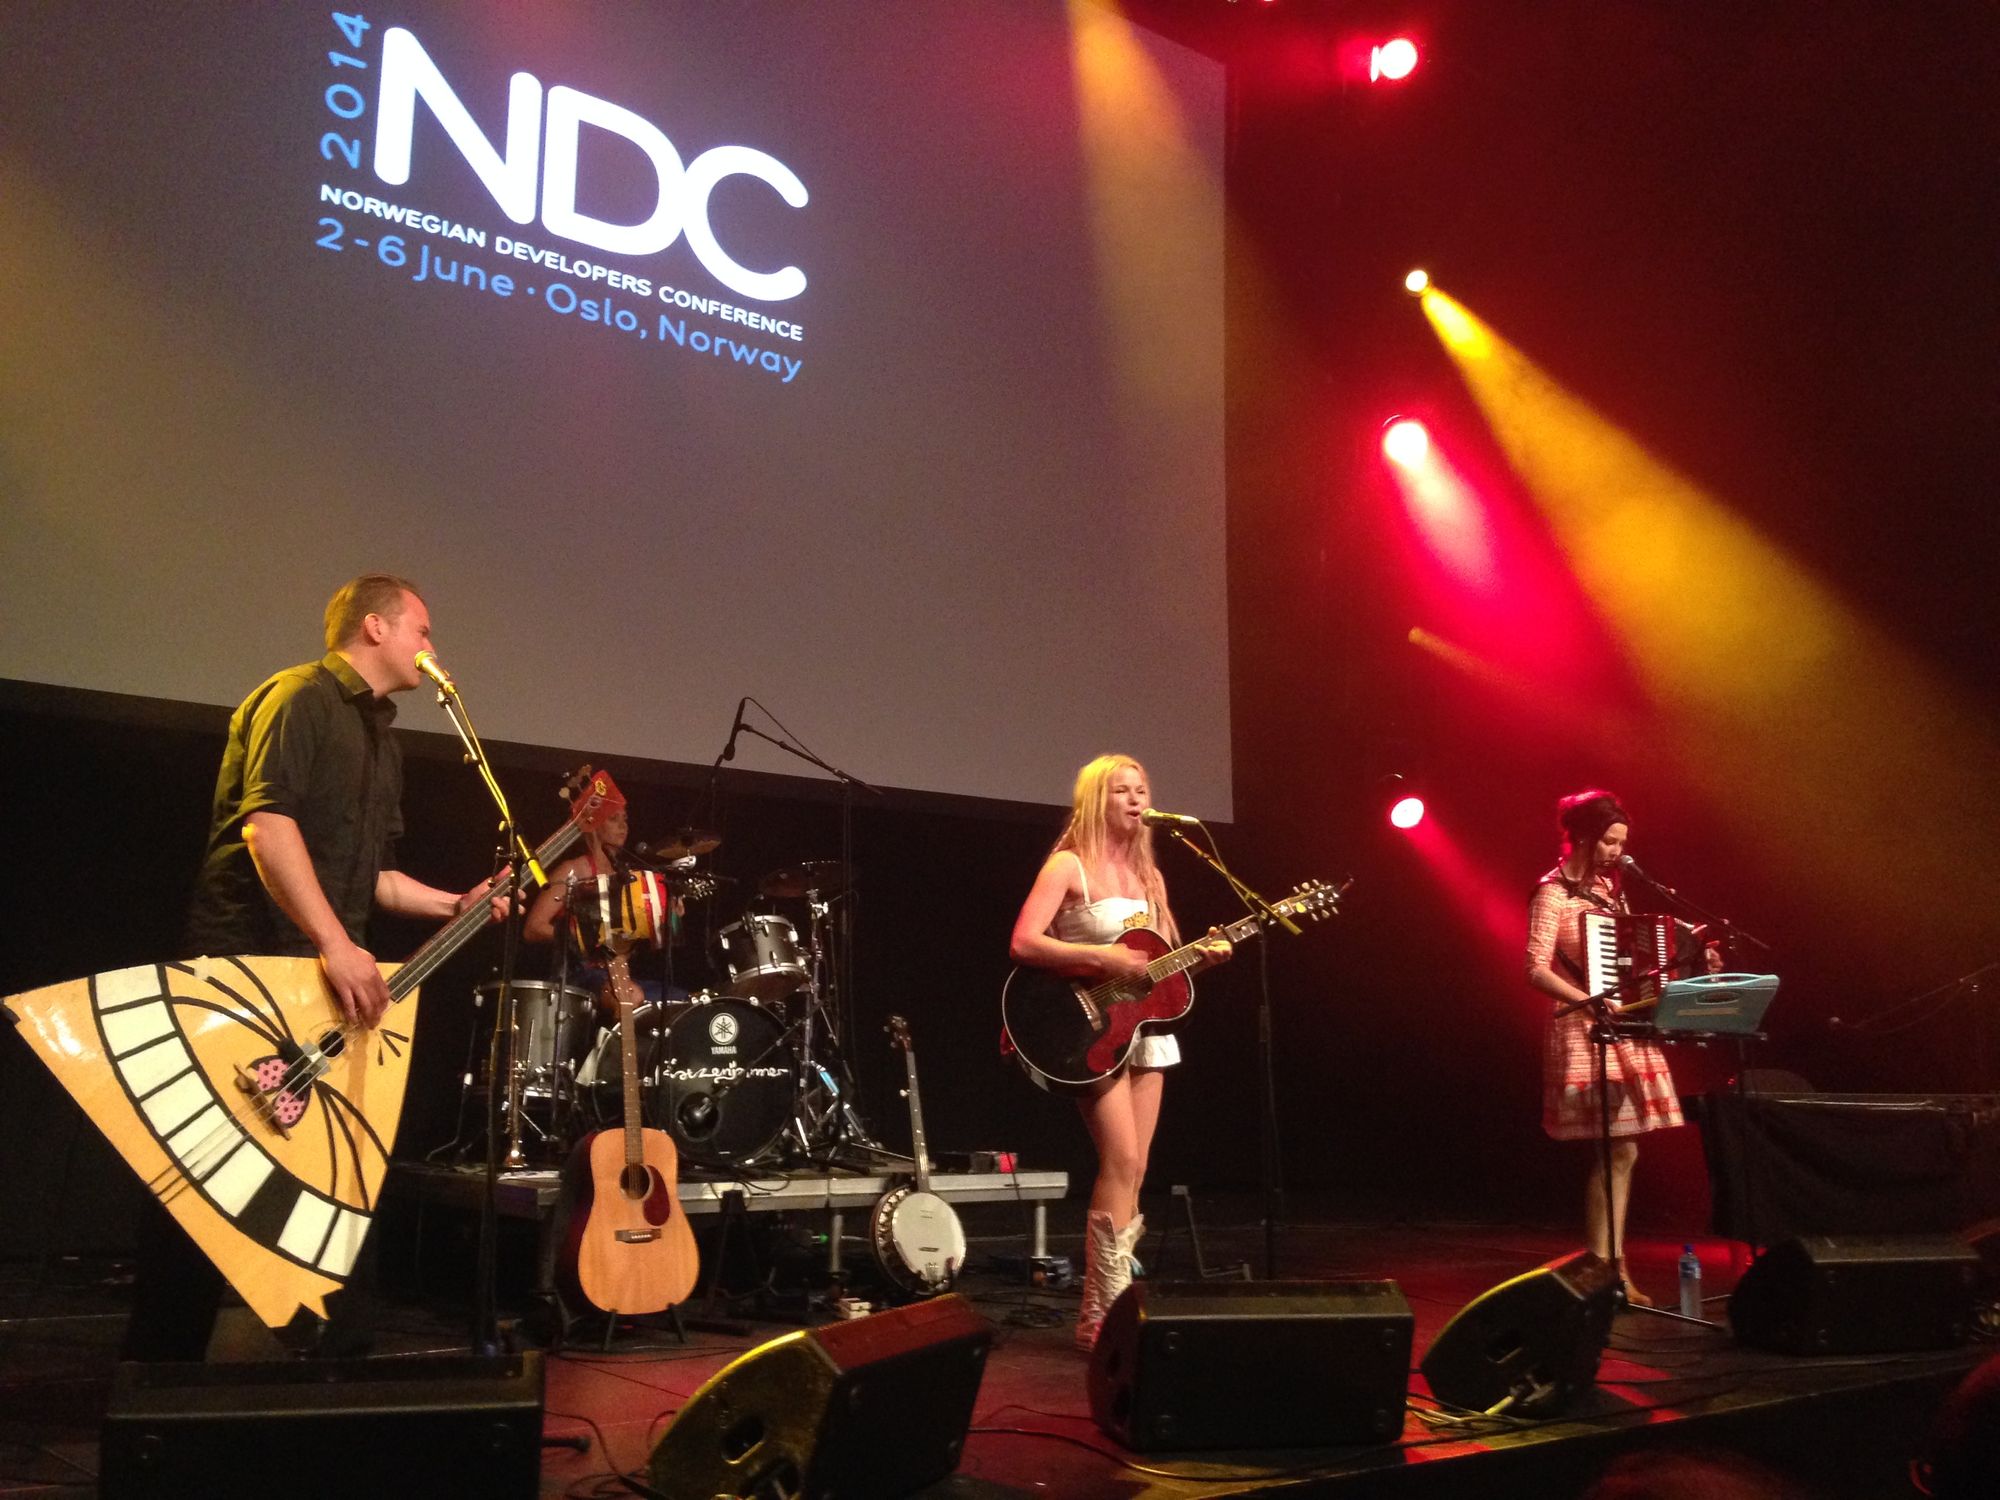 After NDC Oslo 2014